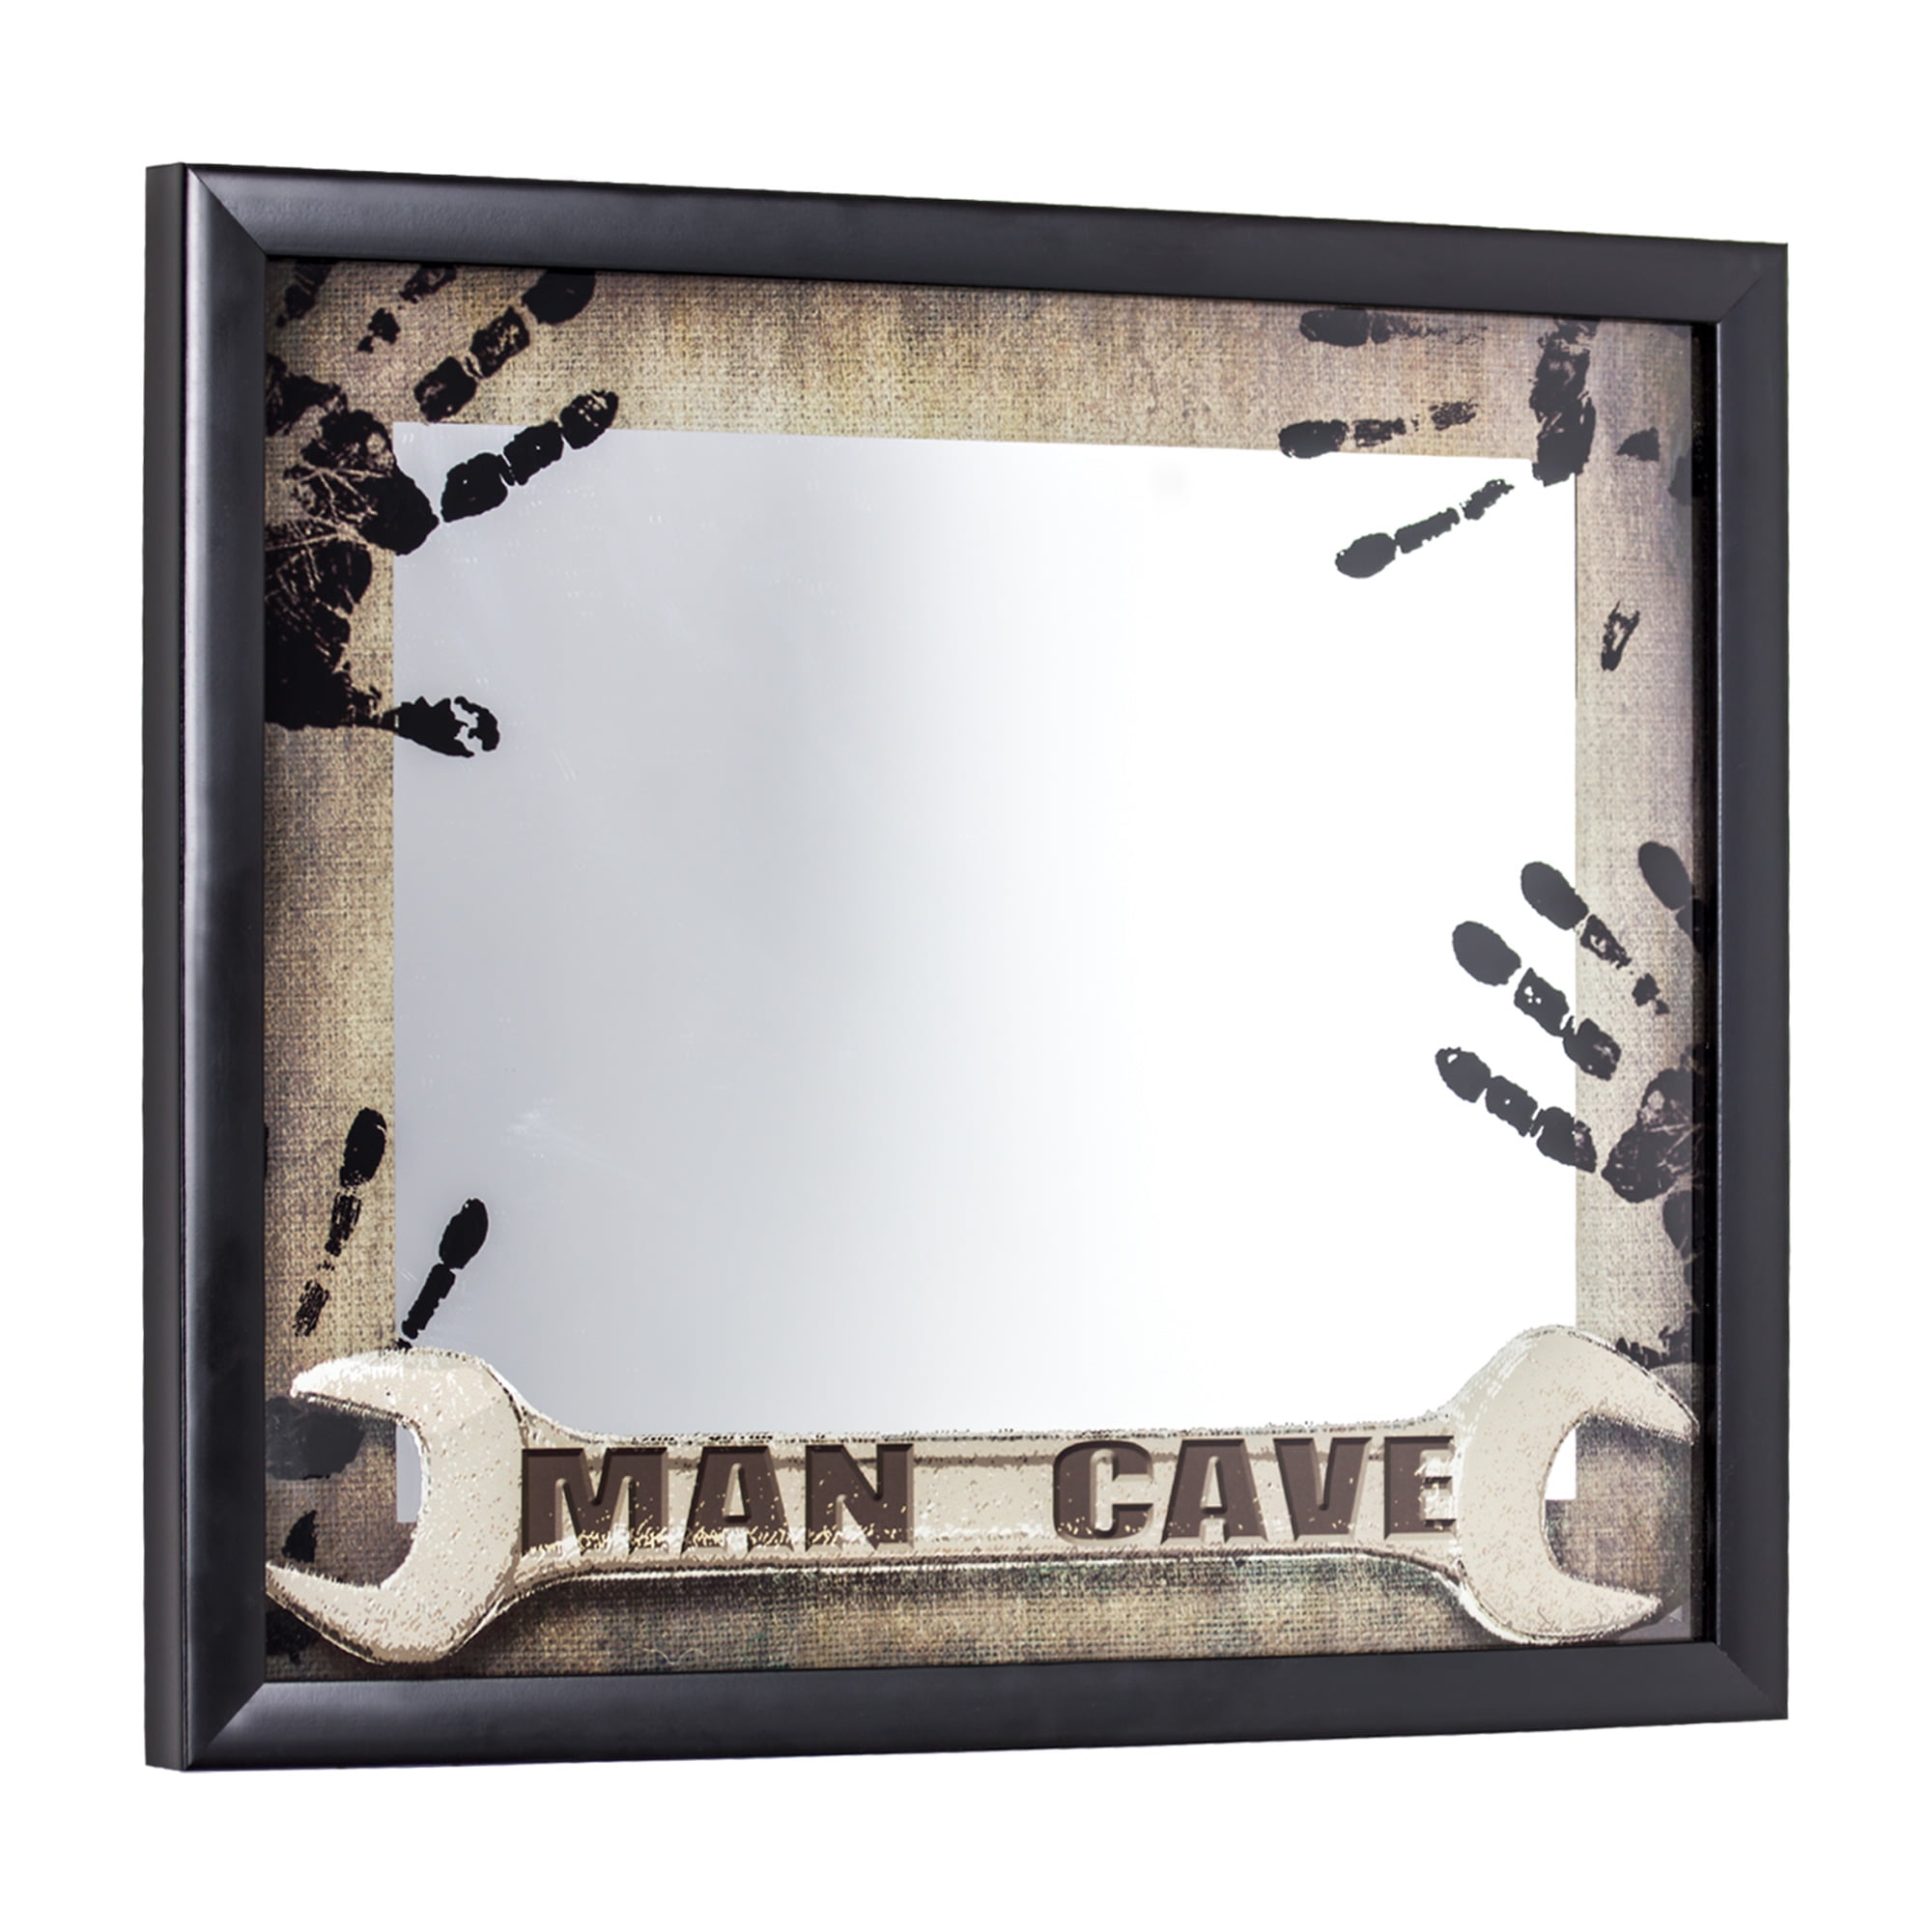 CHAMPION VINTAGE MAN CAVE SUPER HIGH GLOSS OUTDOOR 6 INCH DECAL STICKER